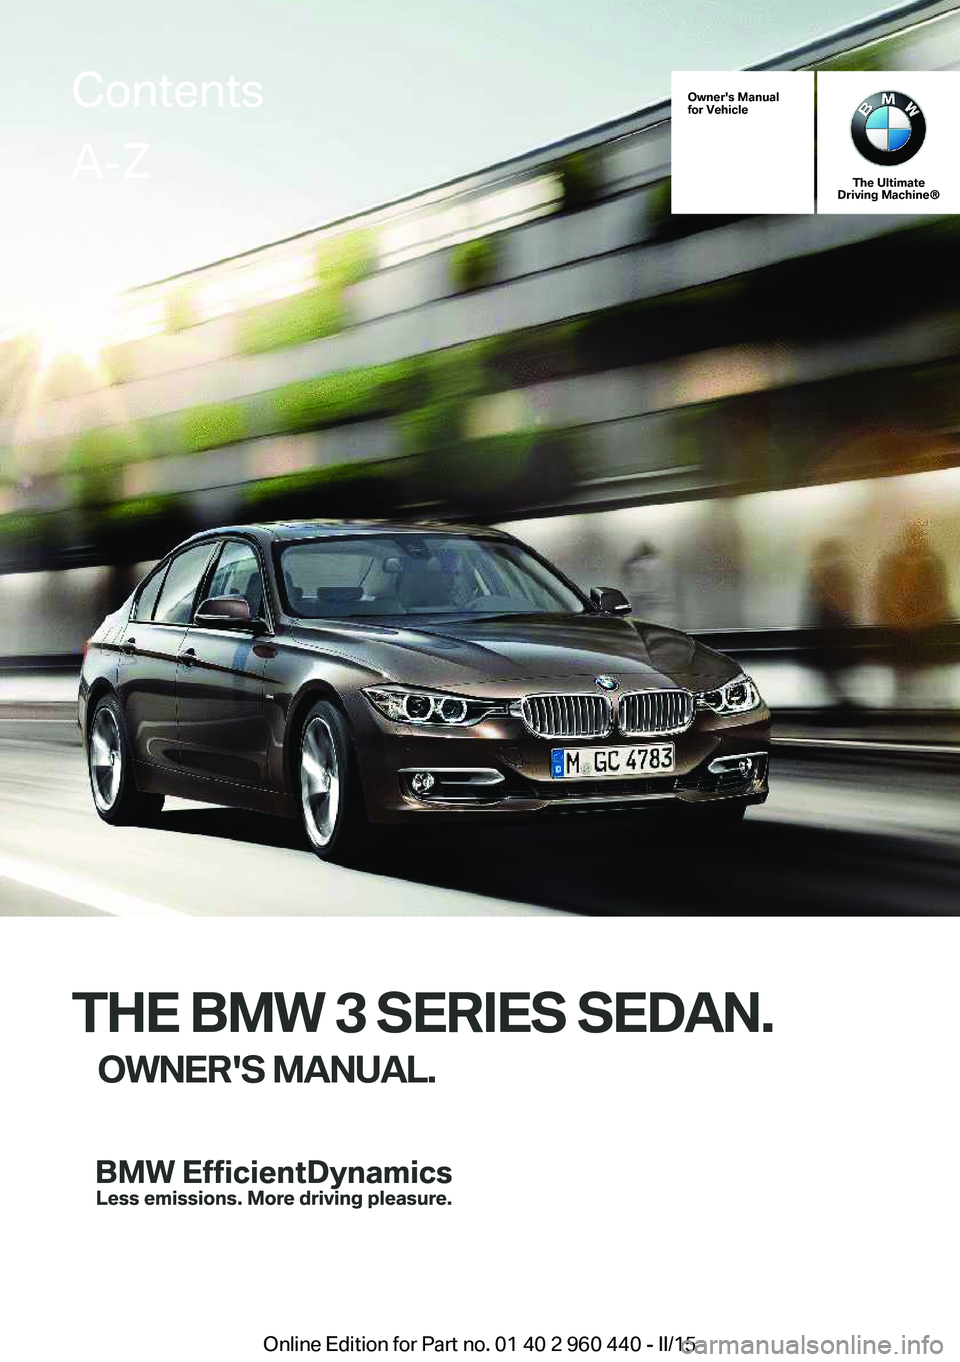 BMW 340I XDRIVE SEDAN 2016  Owners Manual Owner's Manual
for Vehicle
The Ultimate
Driving Machine®
THE BMW 3 SERIES SEDAN.
OWNER'S MANUAL.
ContentsA-Z
Online Edition for Part no. 01 40 2 960 440 - II/15   